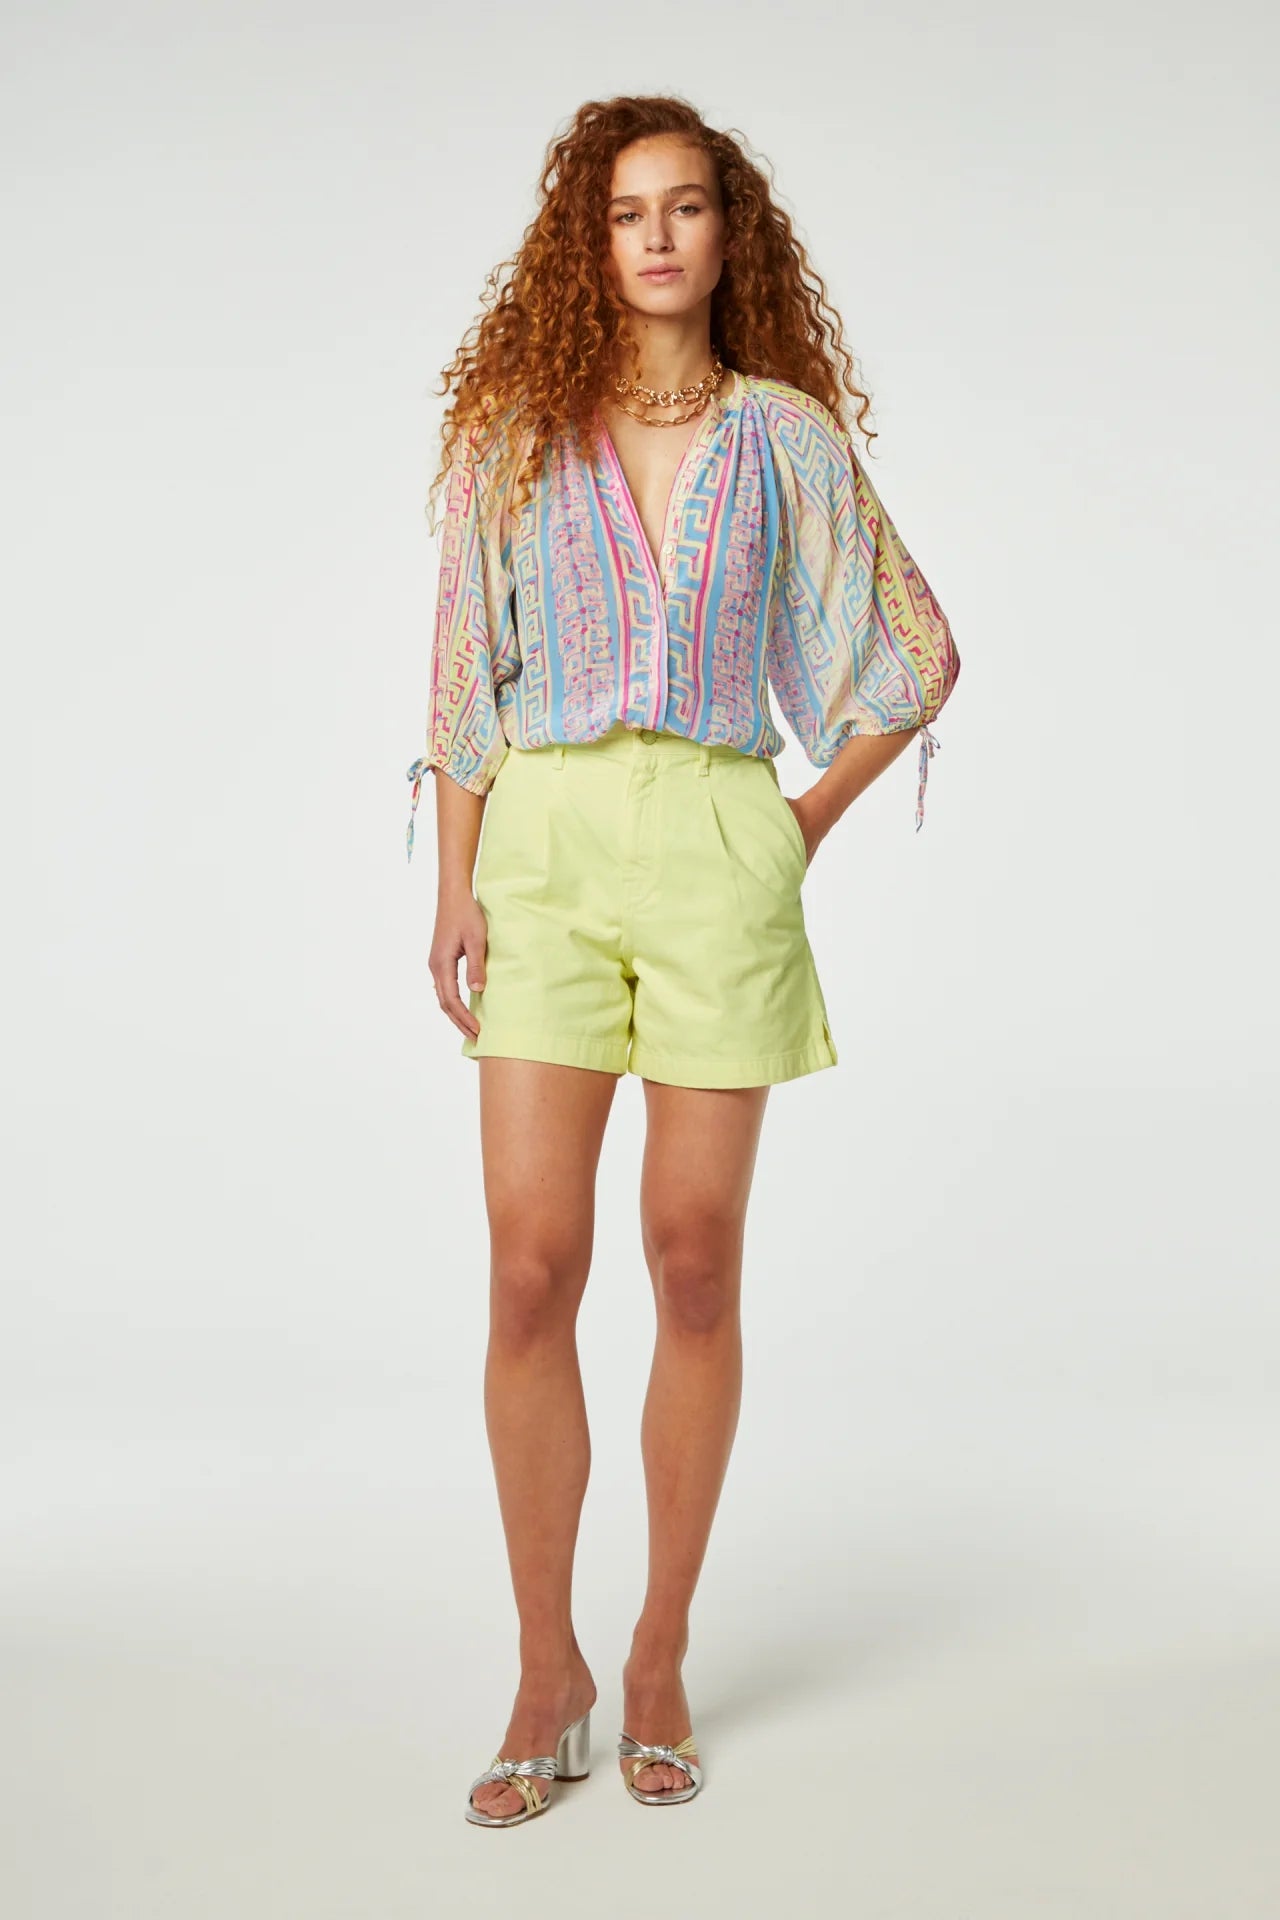 A woman stands posing in a bright yellow wash patterned blouse and lime green Fabienne Chapot Limoncello shorts, paired with silver sandals, against a white background.